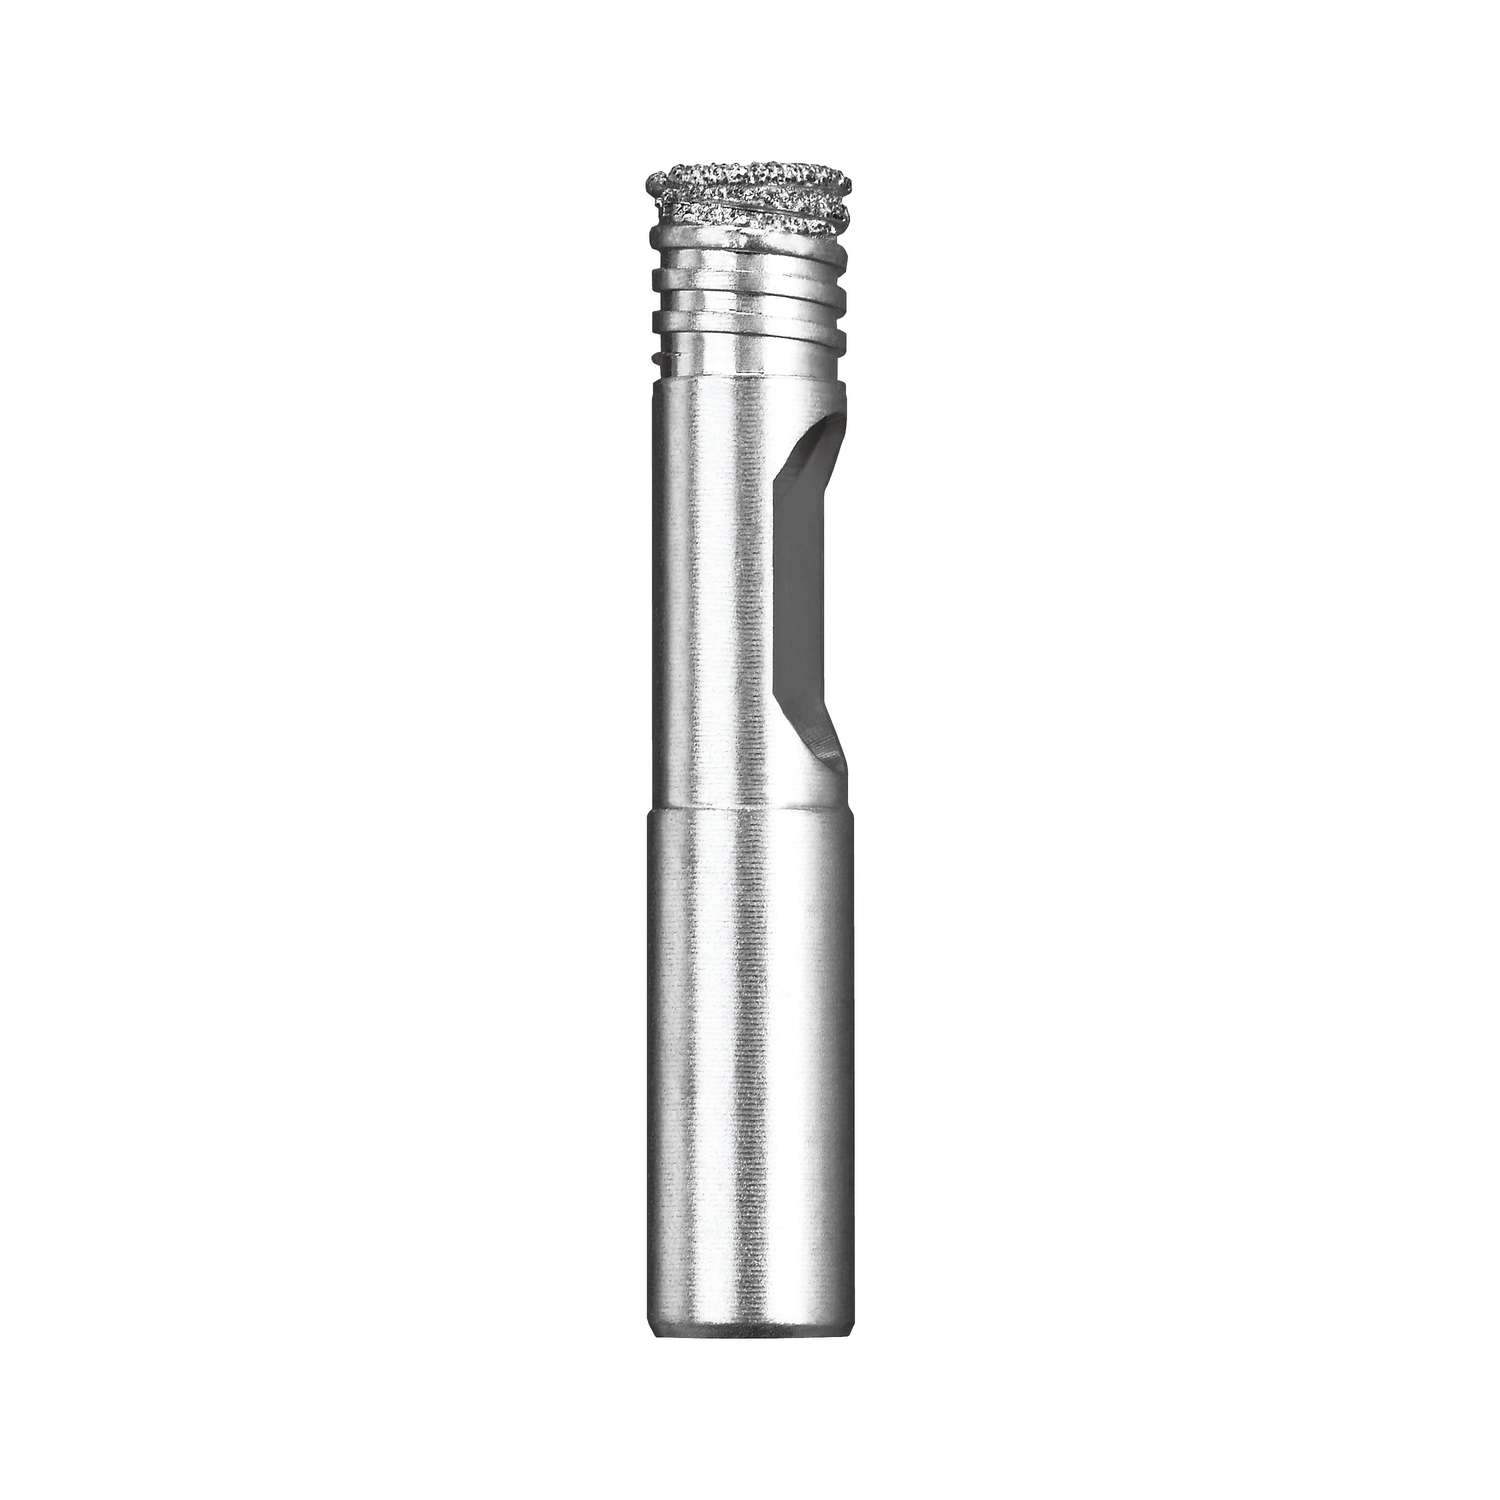 Diamond Tip Circle and Straight Glass Cutter, Adjustable Scaled